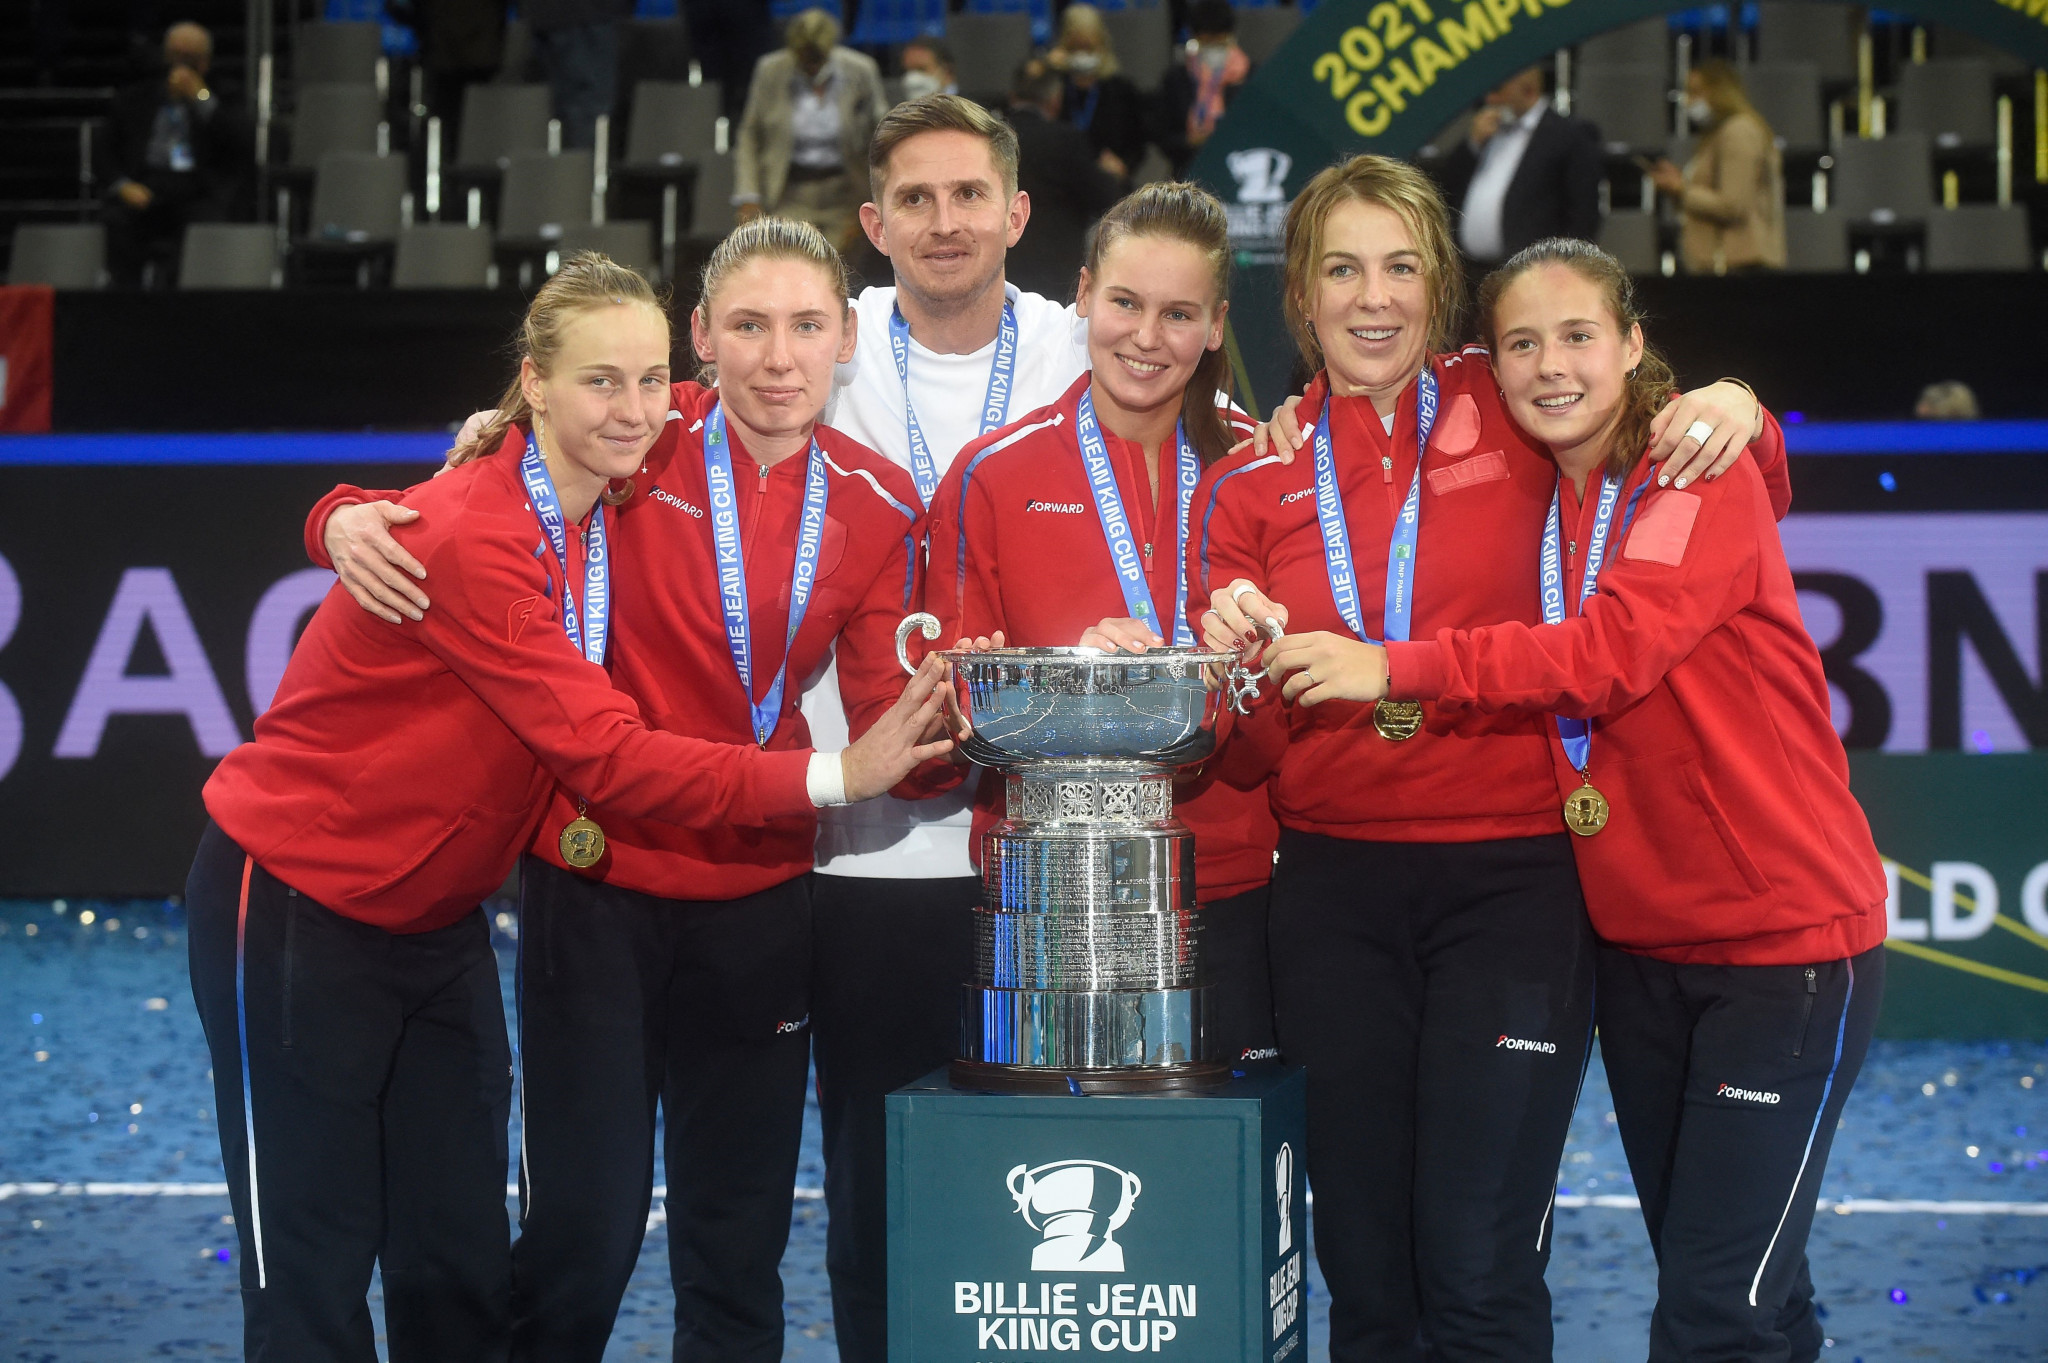 Russian Tennis Federation overcome Switzerland to win Billie Jean King Cup